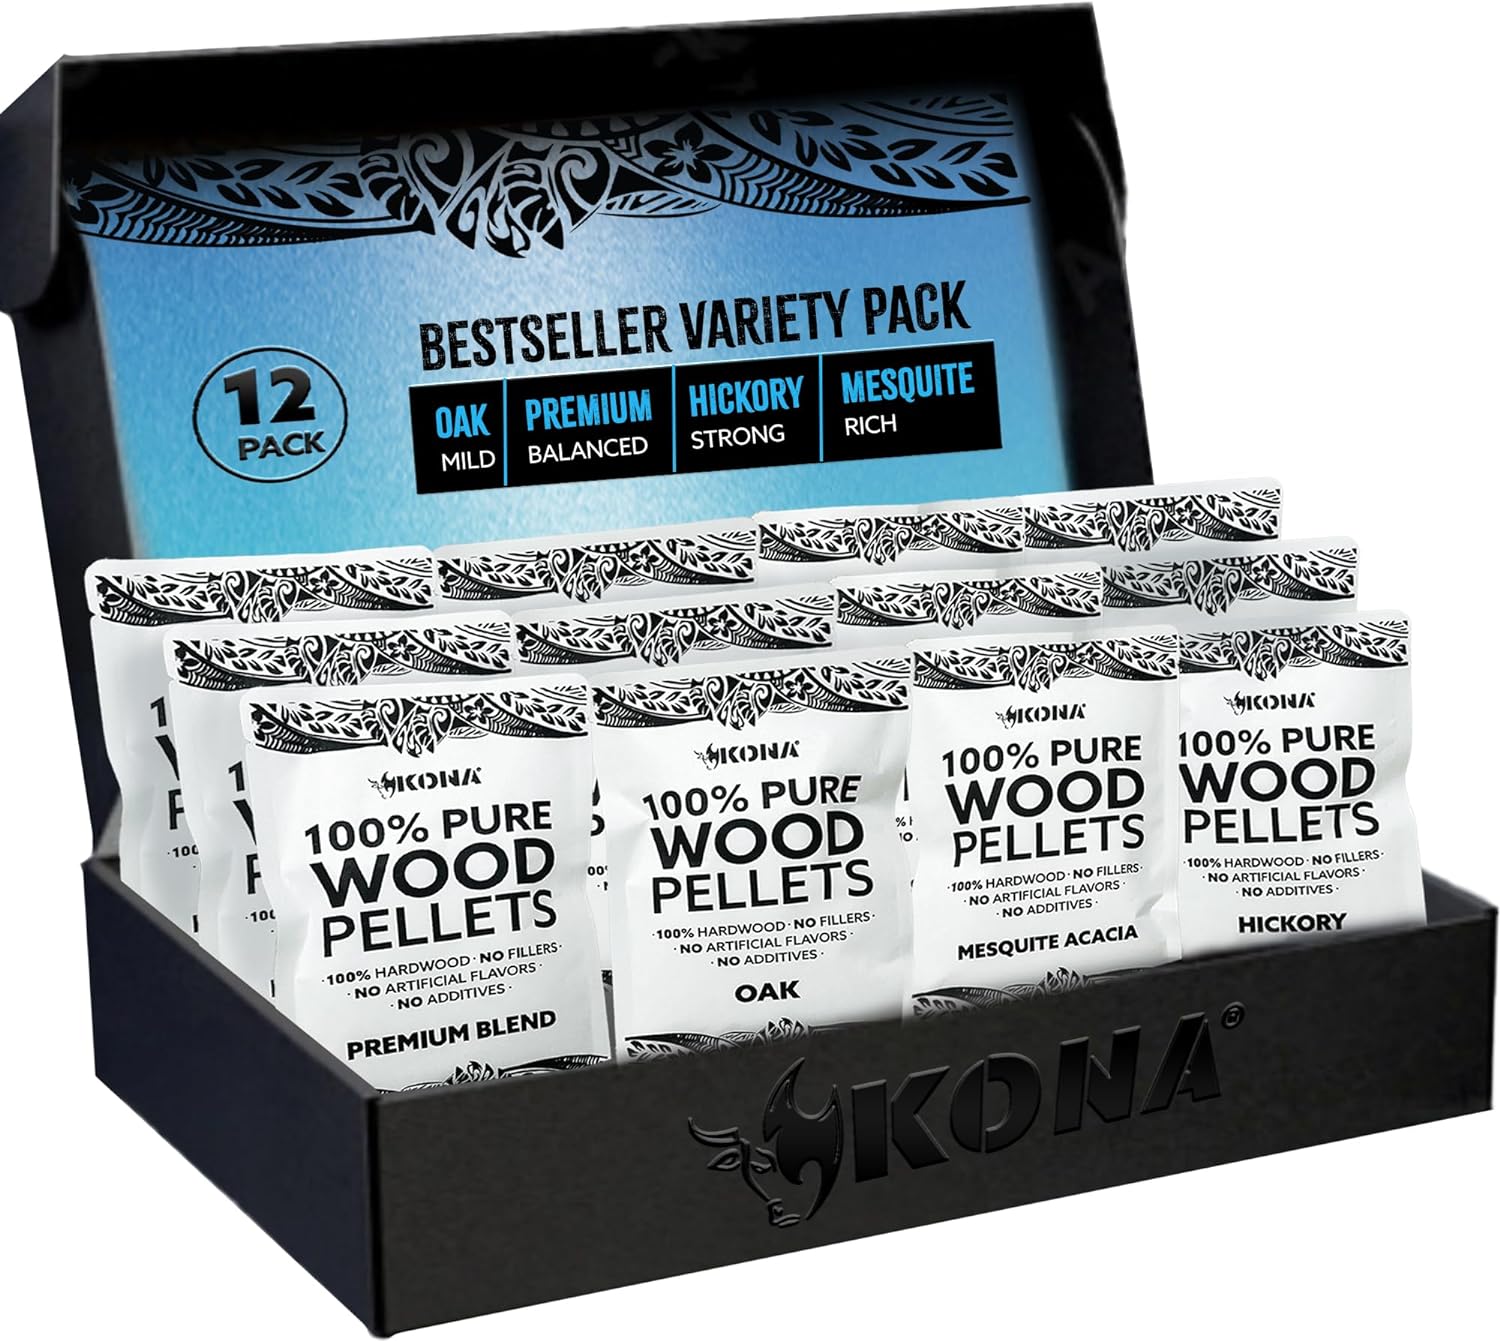 Kona Wood Pellets Intended for The Ninja Woodfire Grill, 12 Single-Use Pouches (4 Flavors)